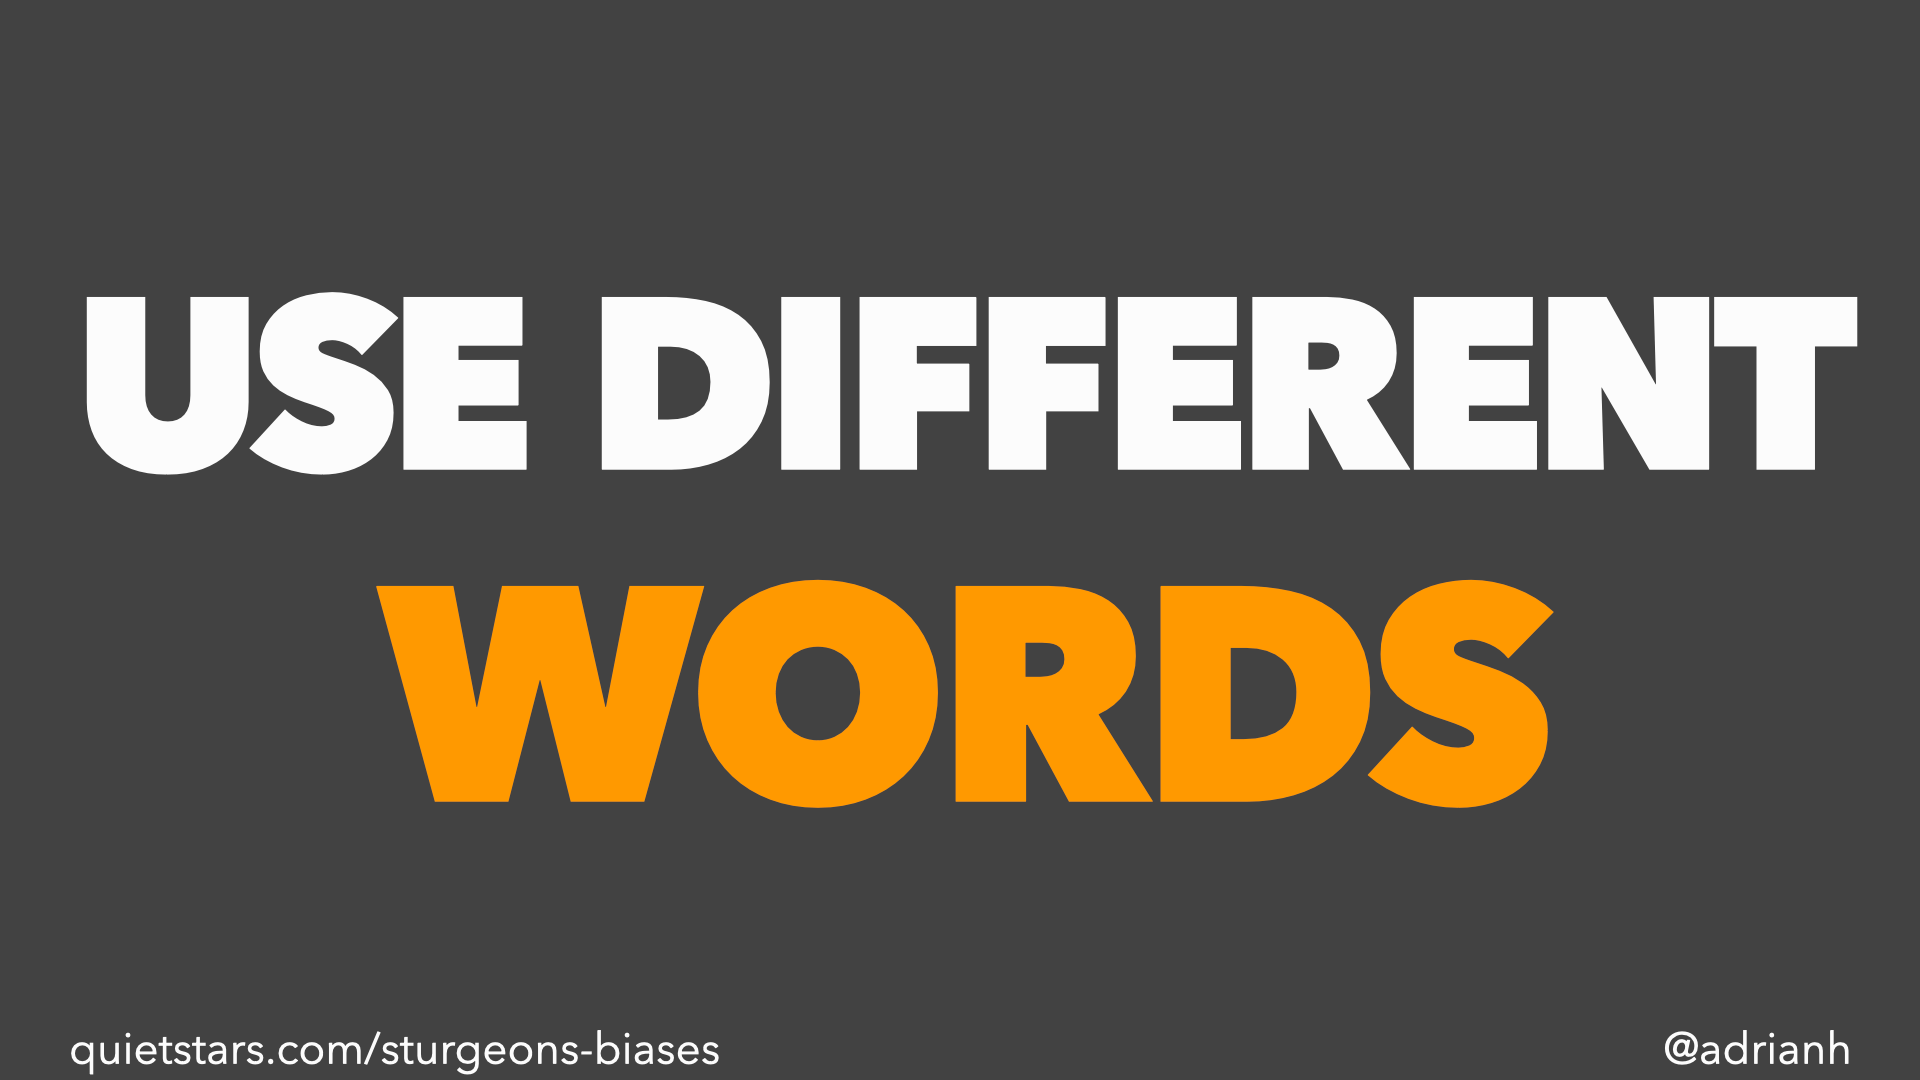 Use different words